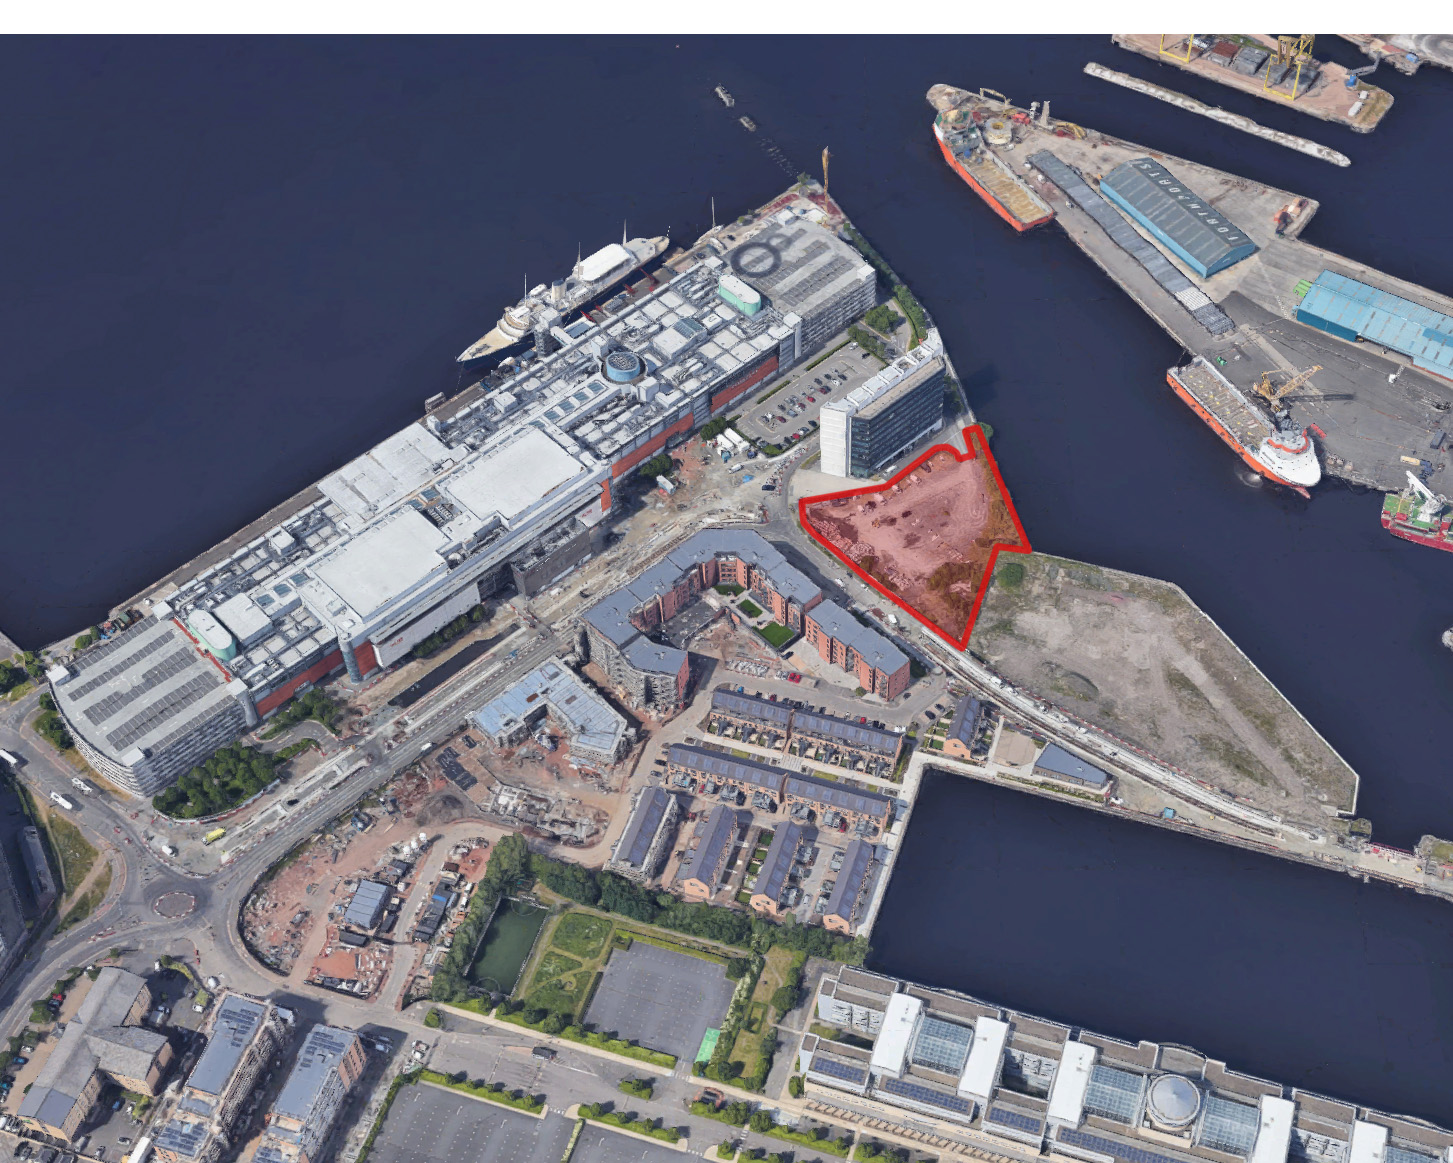 Residential-led proposals unveiled for Leith's Ocean Point